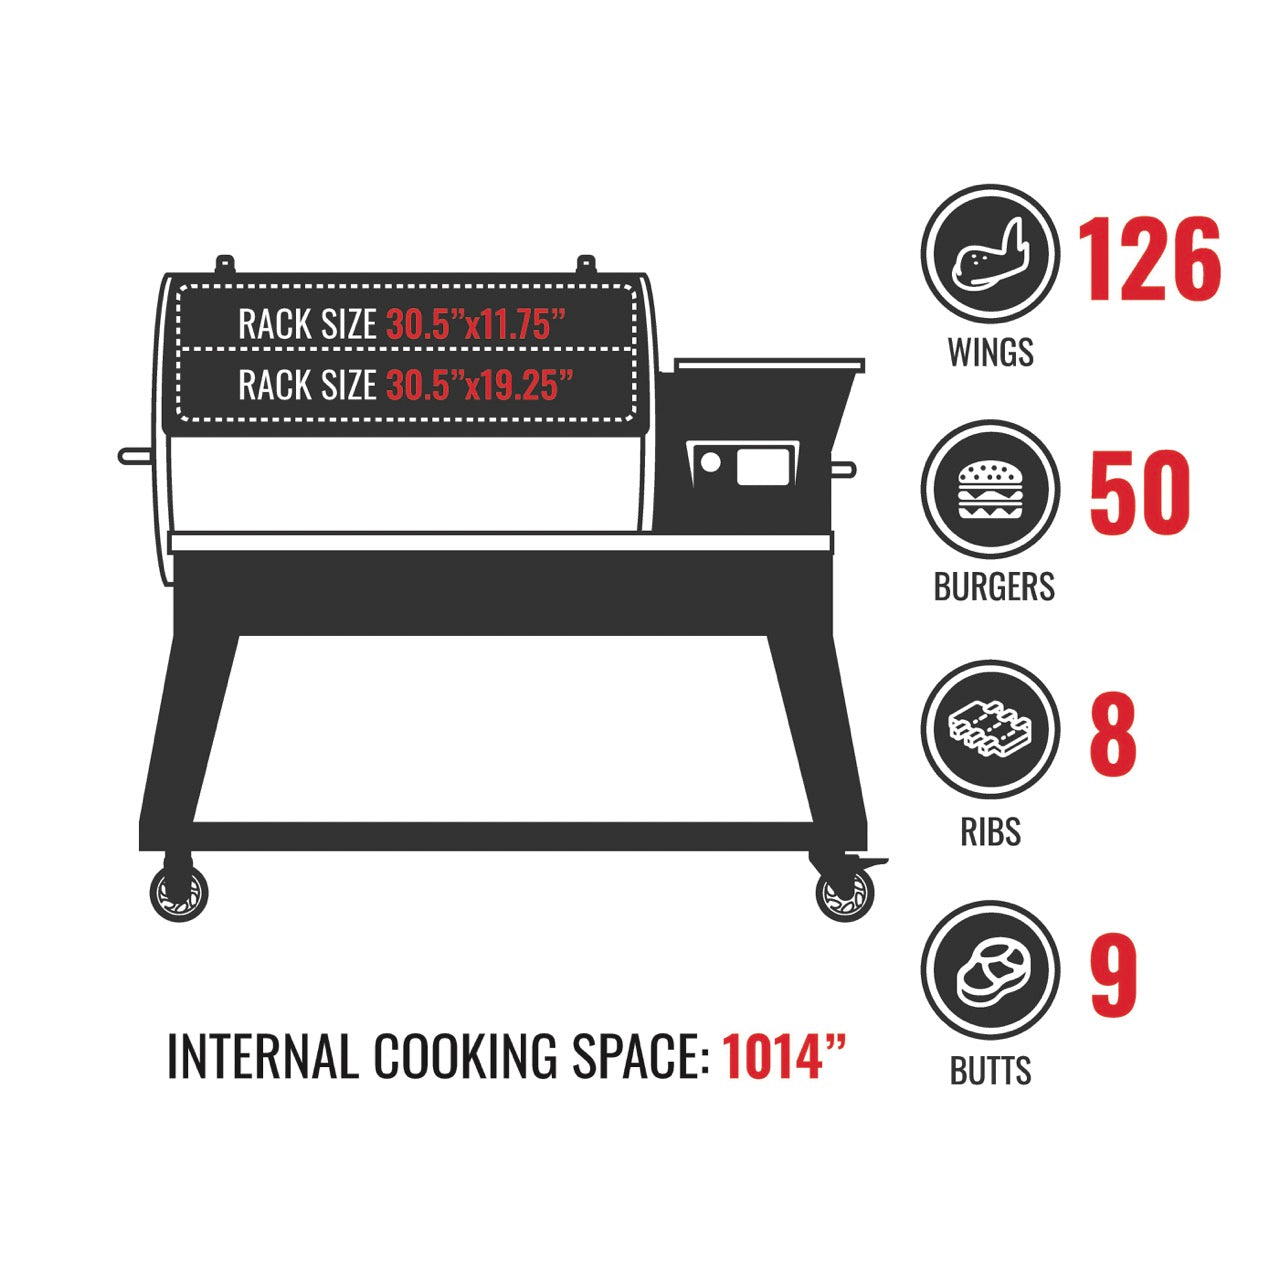 Cartoon picture of the Backyard Beast 1000 showing that the internal cooking space is 1014